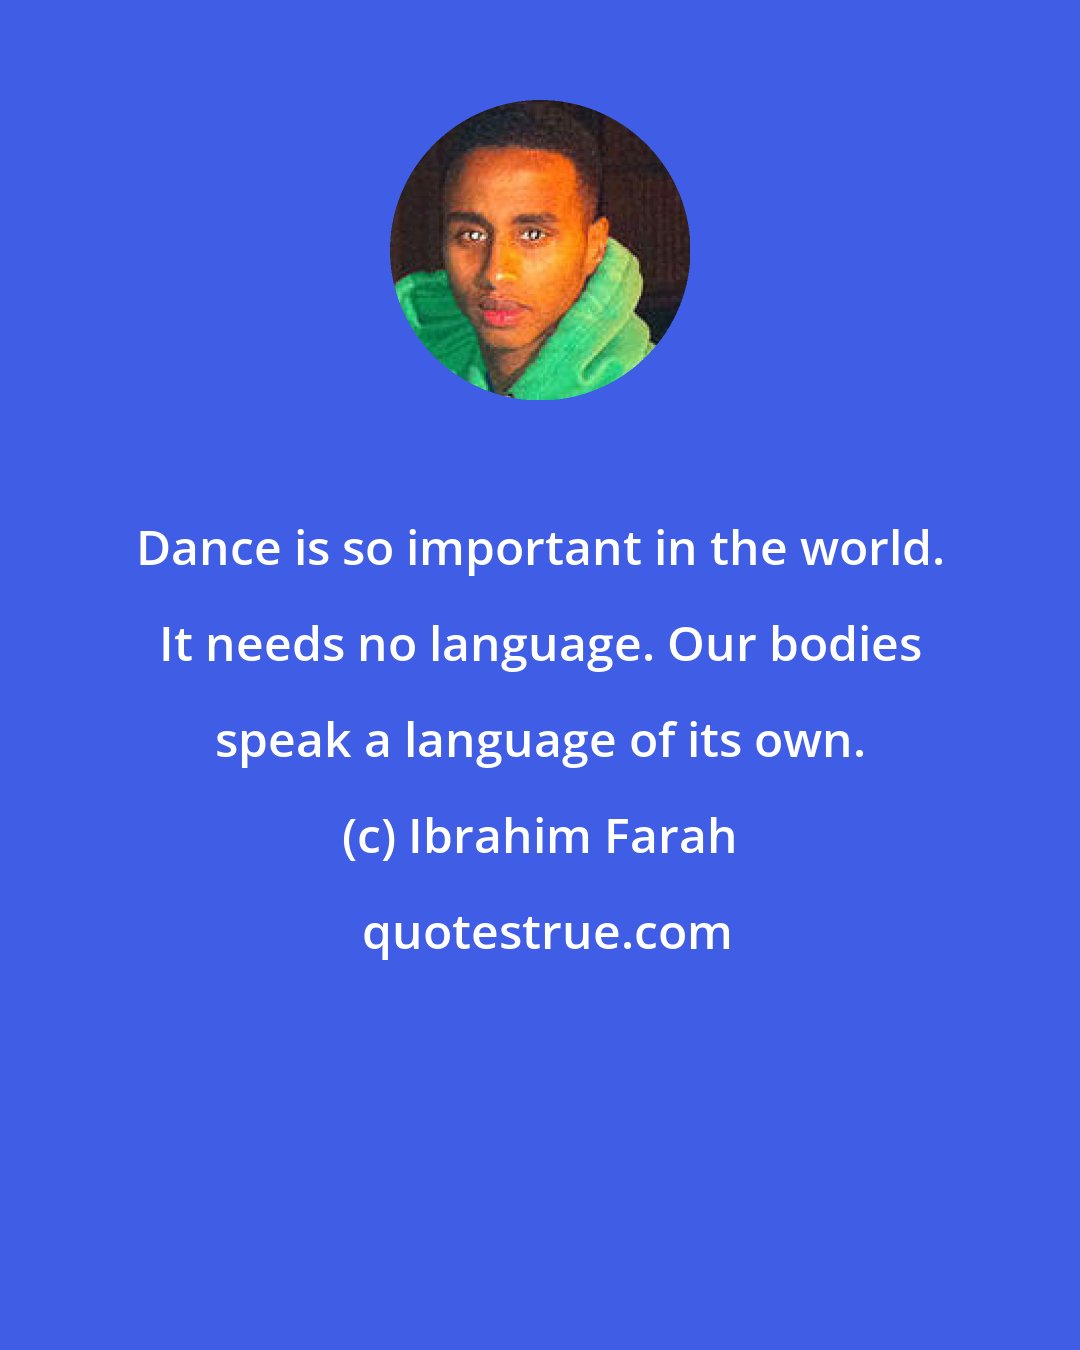 Ibrahim Farah: Dance is so important in the world. It needs no language. Our bodies speak a language of its own.